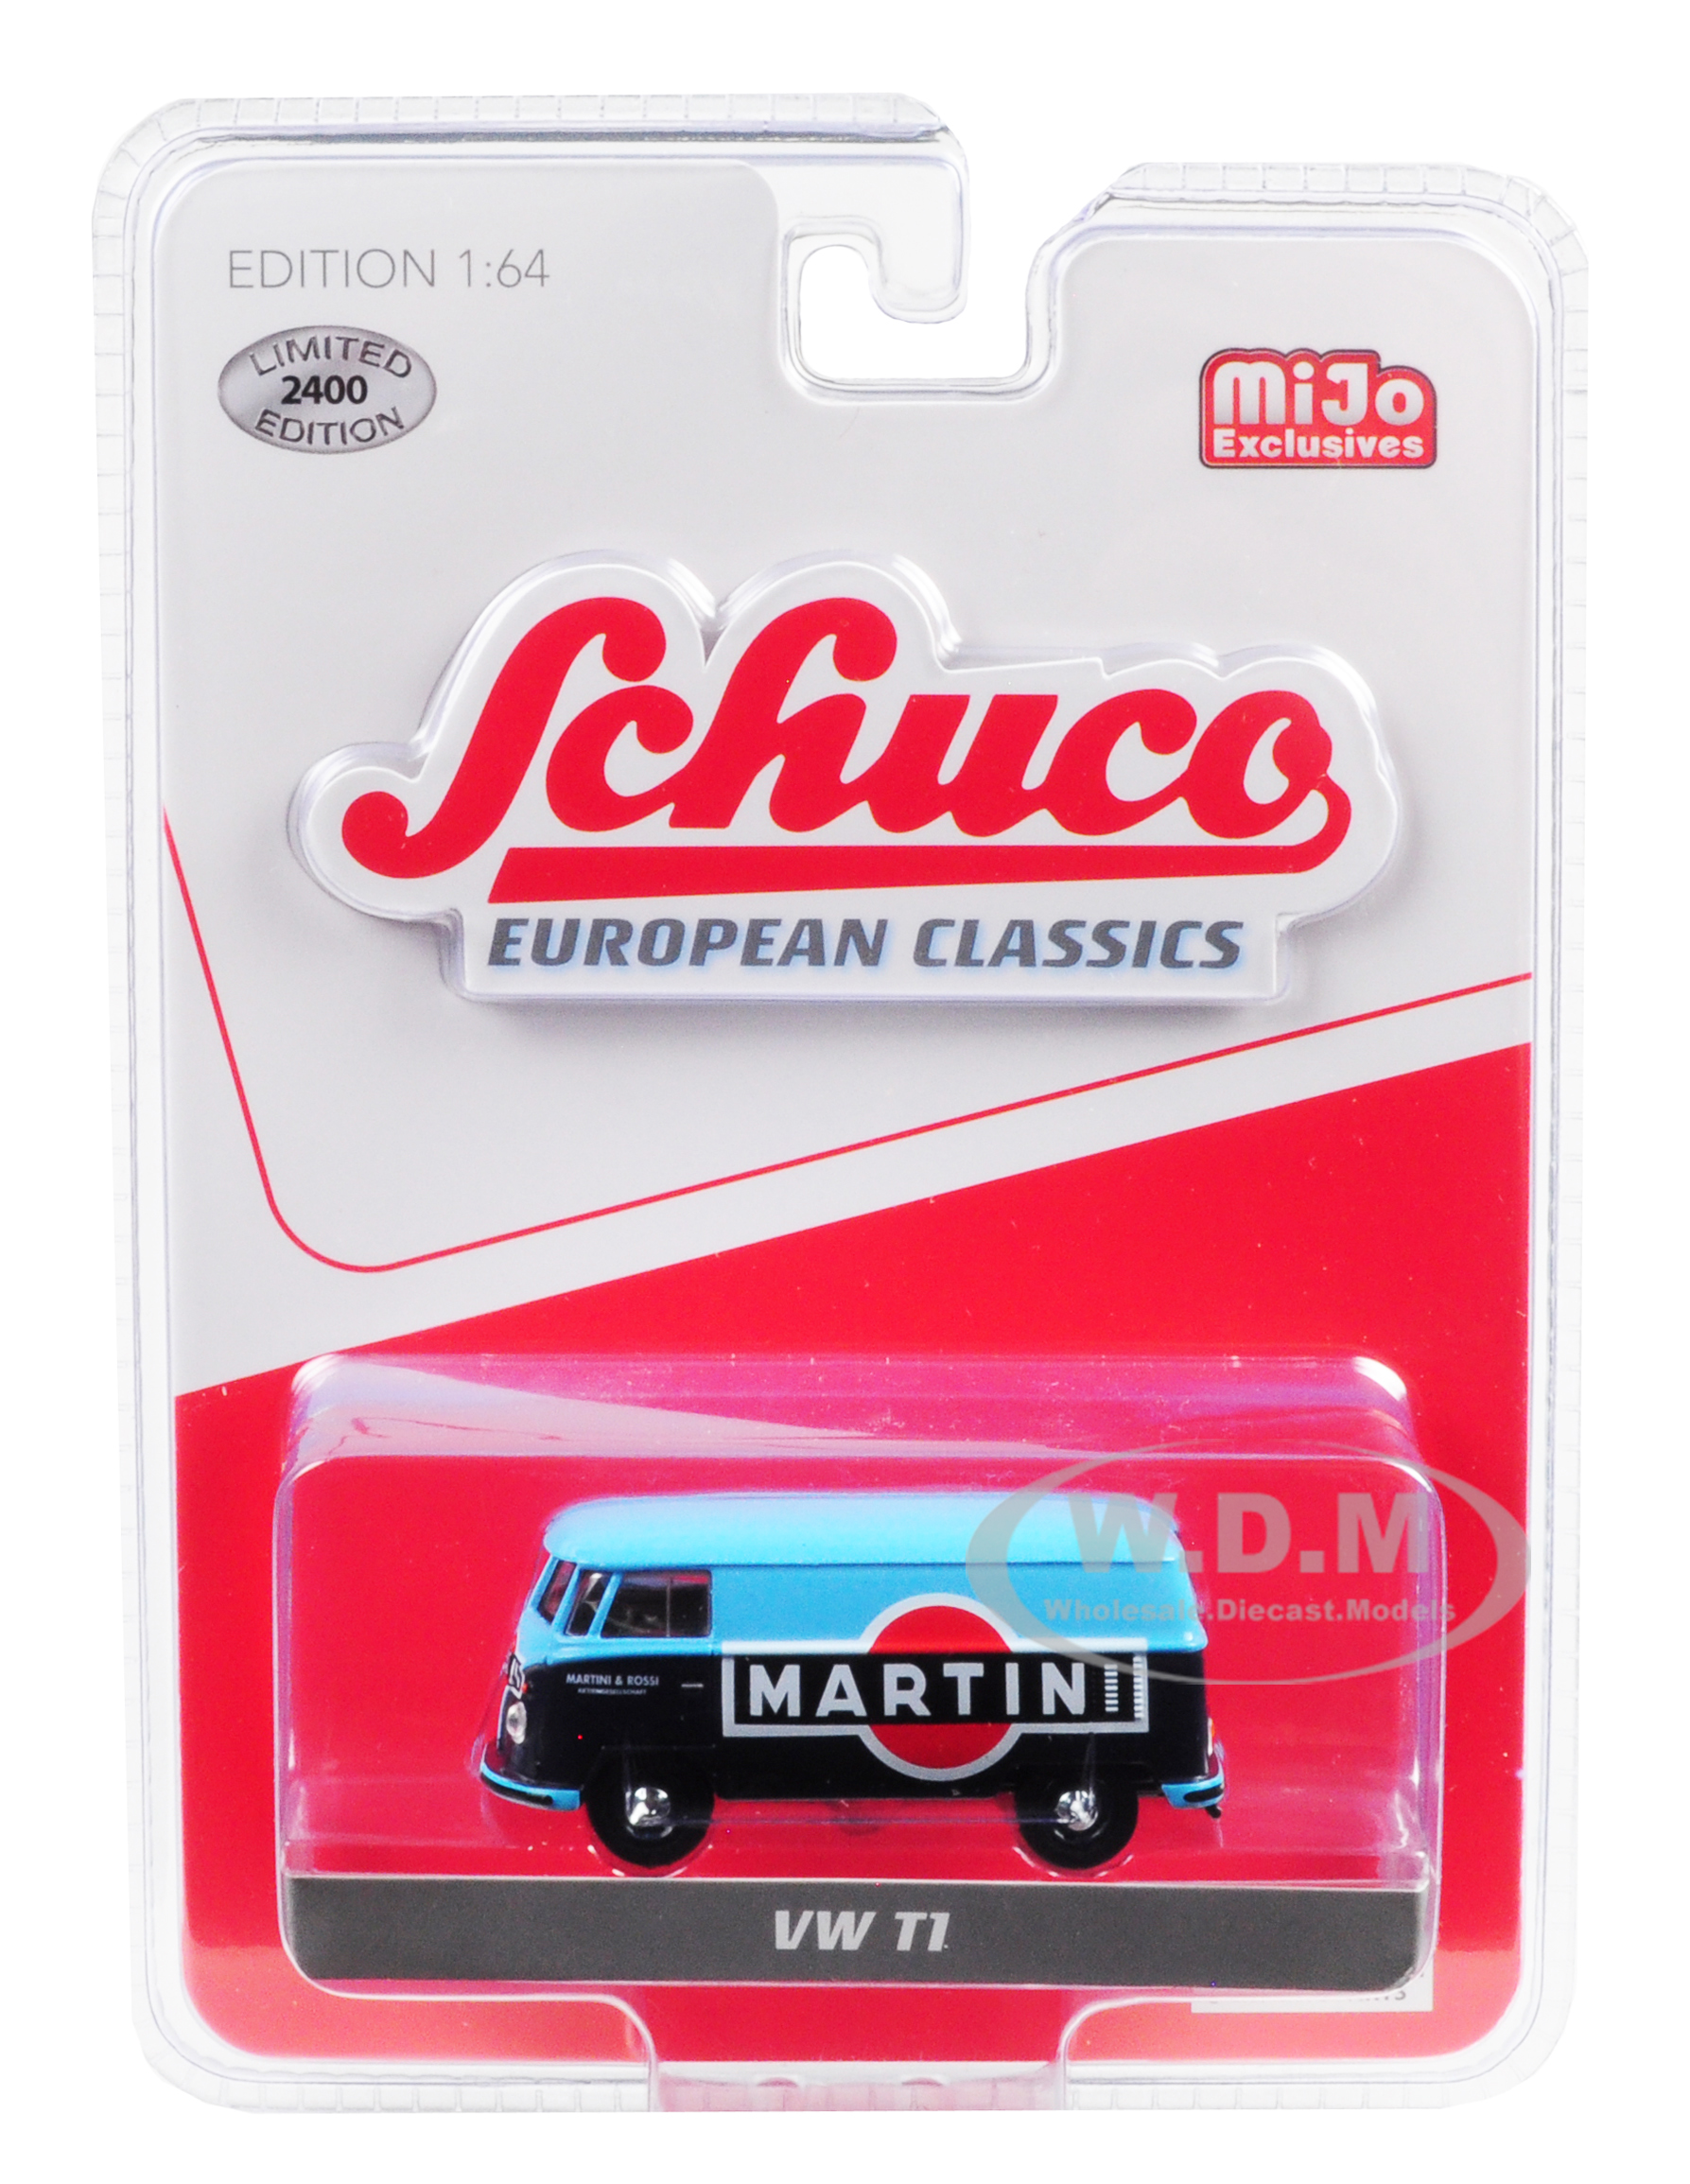 Volkswagen T1 Panel Van "martini Racing" Blue "european Classics" Series Limited Edition To 2400 Pieces Worldwide 1/64 Diecast Model By Schuco